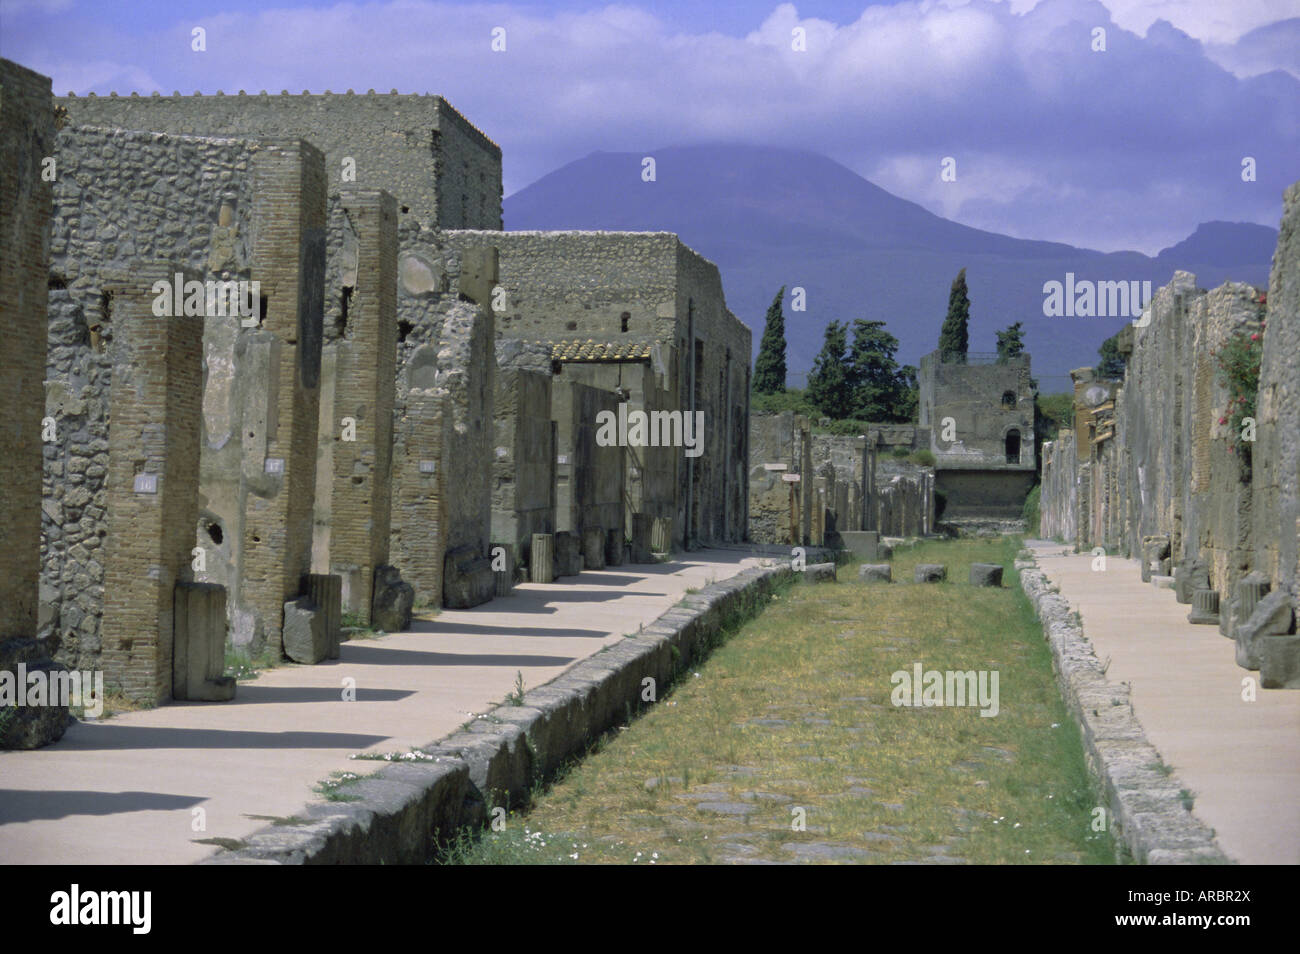 Restored buildings in Roman town buried in AD 79 by ash flows from Mount Vesuvius, in the background, Pompeii, Campania, Italy Stock Photo